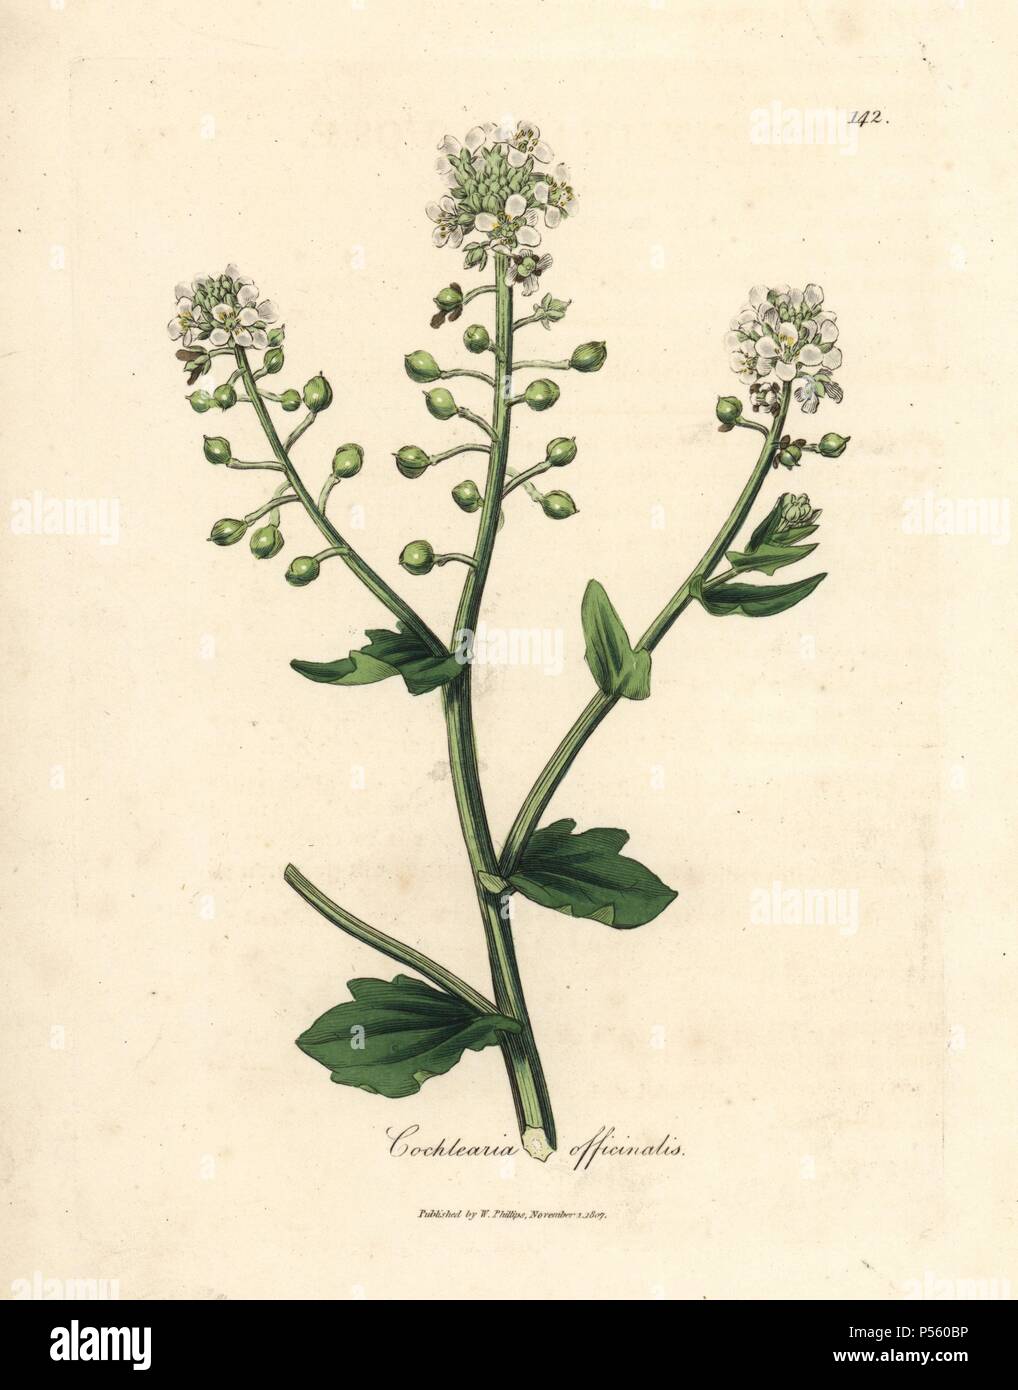 Scurvygrass, Cochlearia officinalis. Handcoloured copperplate engraving from a botanical illustration by James Sowerby from William Woodville and Sir William Jackson Hooker's 'Medical Botany,' John Bohn, London, 1832. The tireless Sowerby (1757-1822) drew over 2, 500 plants for Smith's mammoth 'English Botany' (1790-1814) and 440 mushrooms for 'Coloured Figures of English Fungi ' (1797) among many other works. Stock Photo